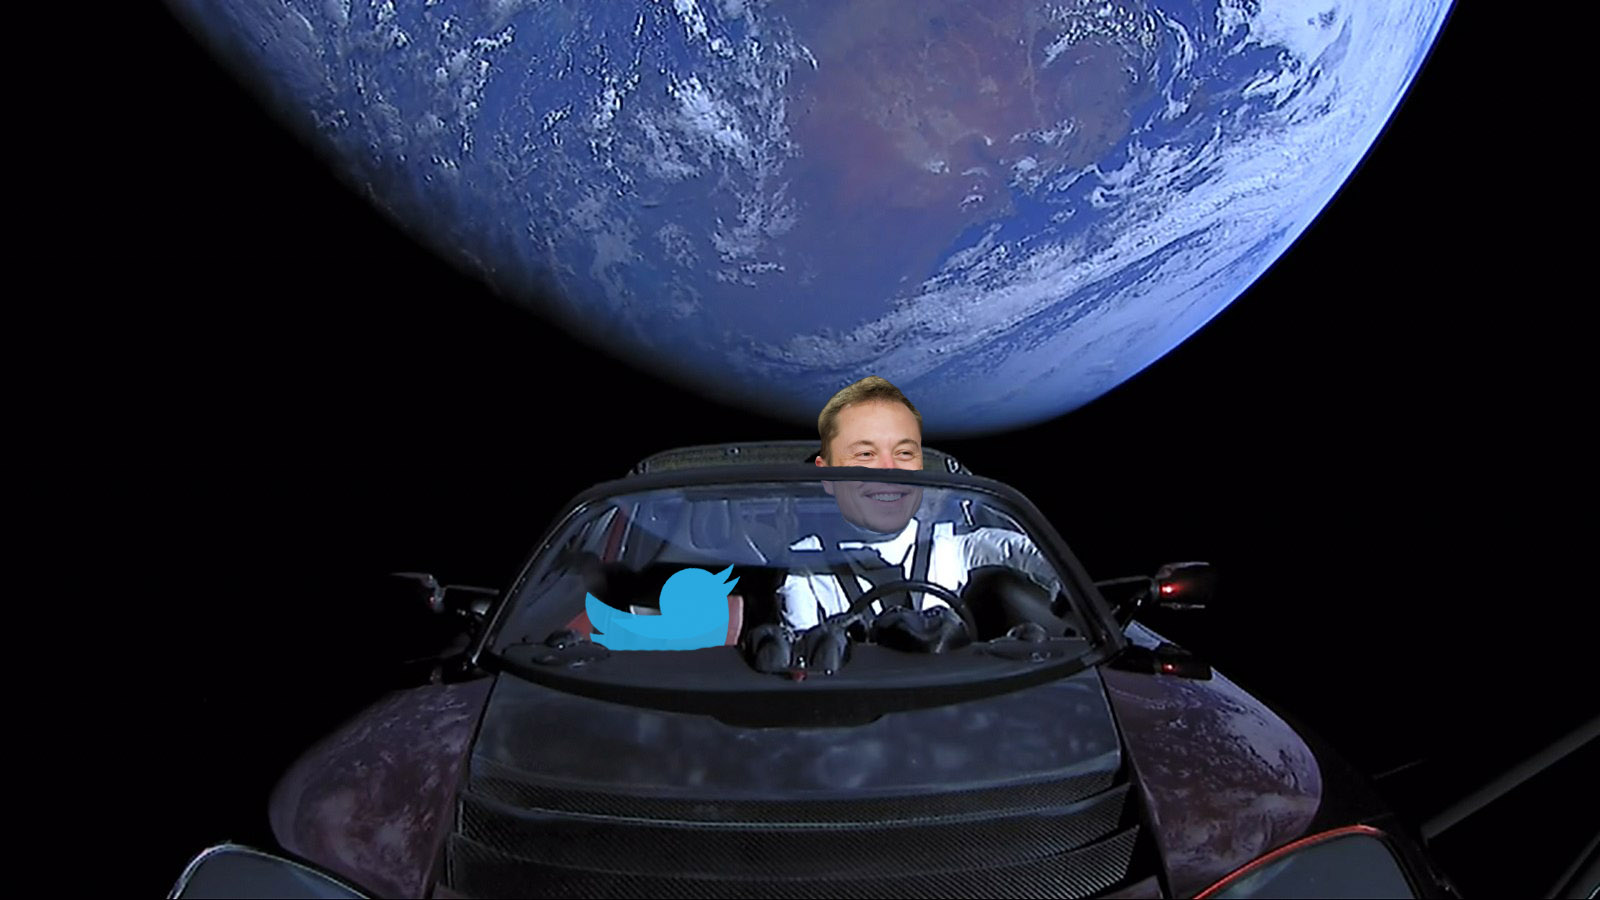 Elon Musk sits in the driver's seat of his Tesla in space, he is next to the Twitter bird logo, the Earth looms in the background